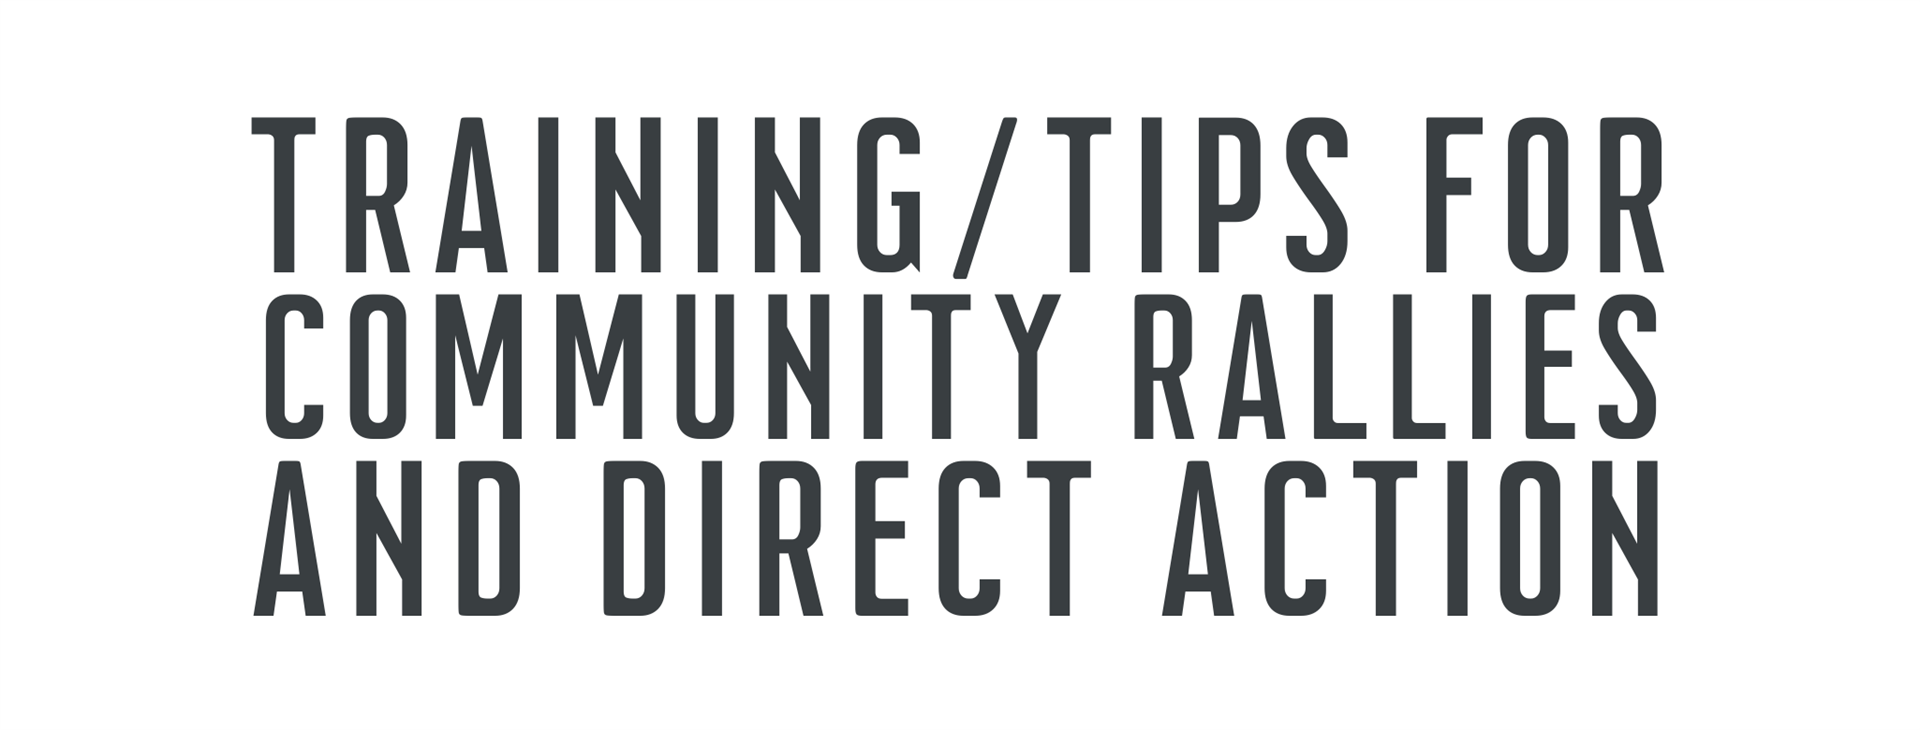 Training/Tips for Community Rallies and Direct Action